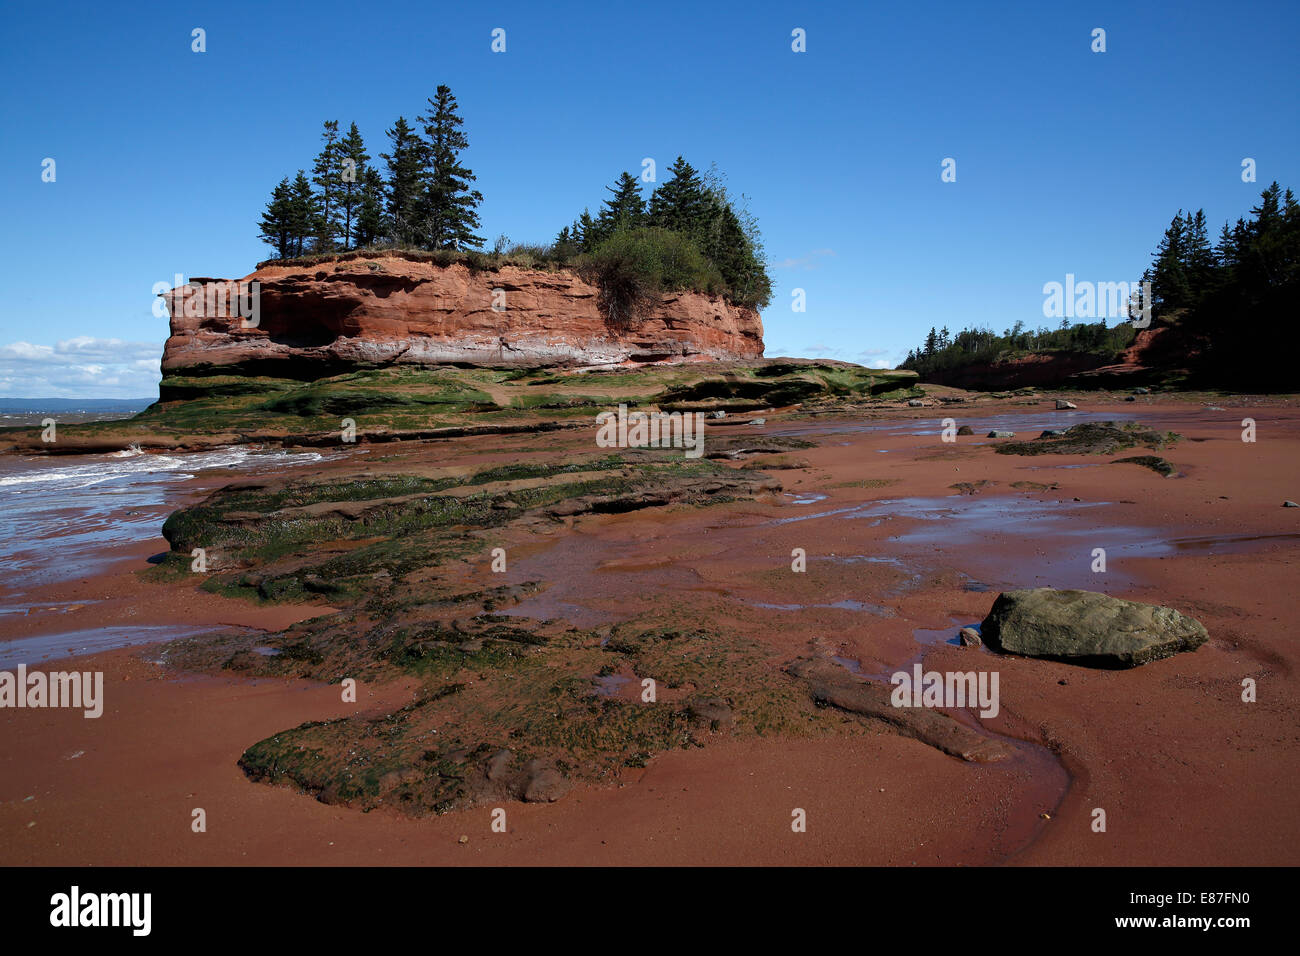 Bay of Fundy, Burncoat Head, reported to have the highest tides in the world, Nova Scotia, Canada Stock Photo